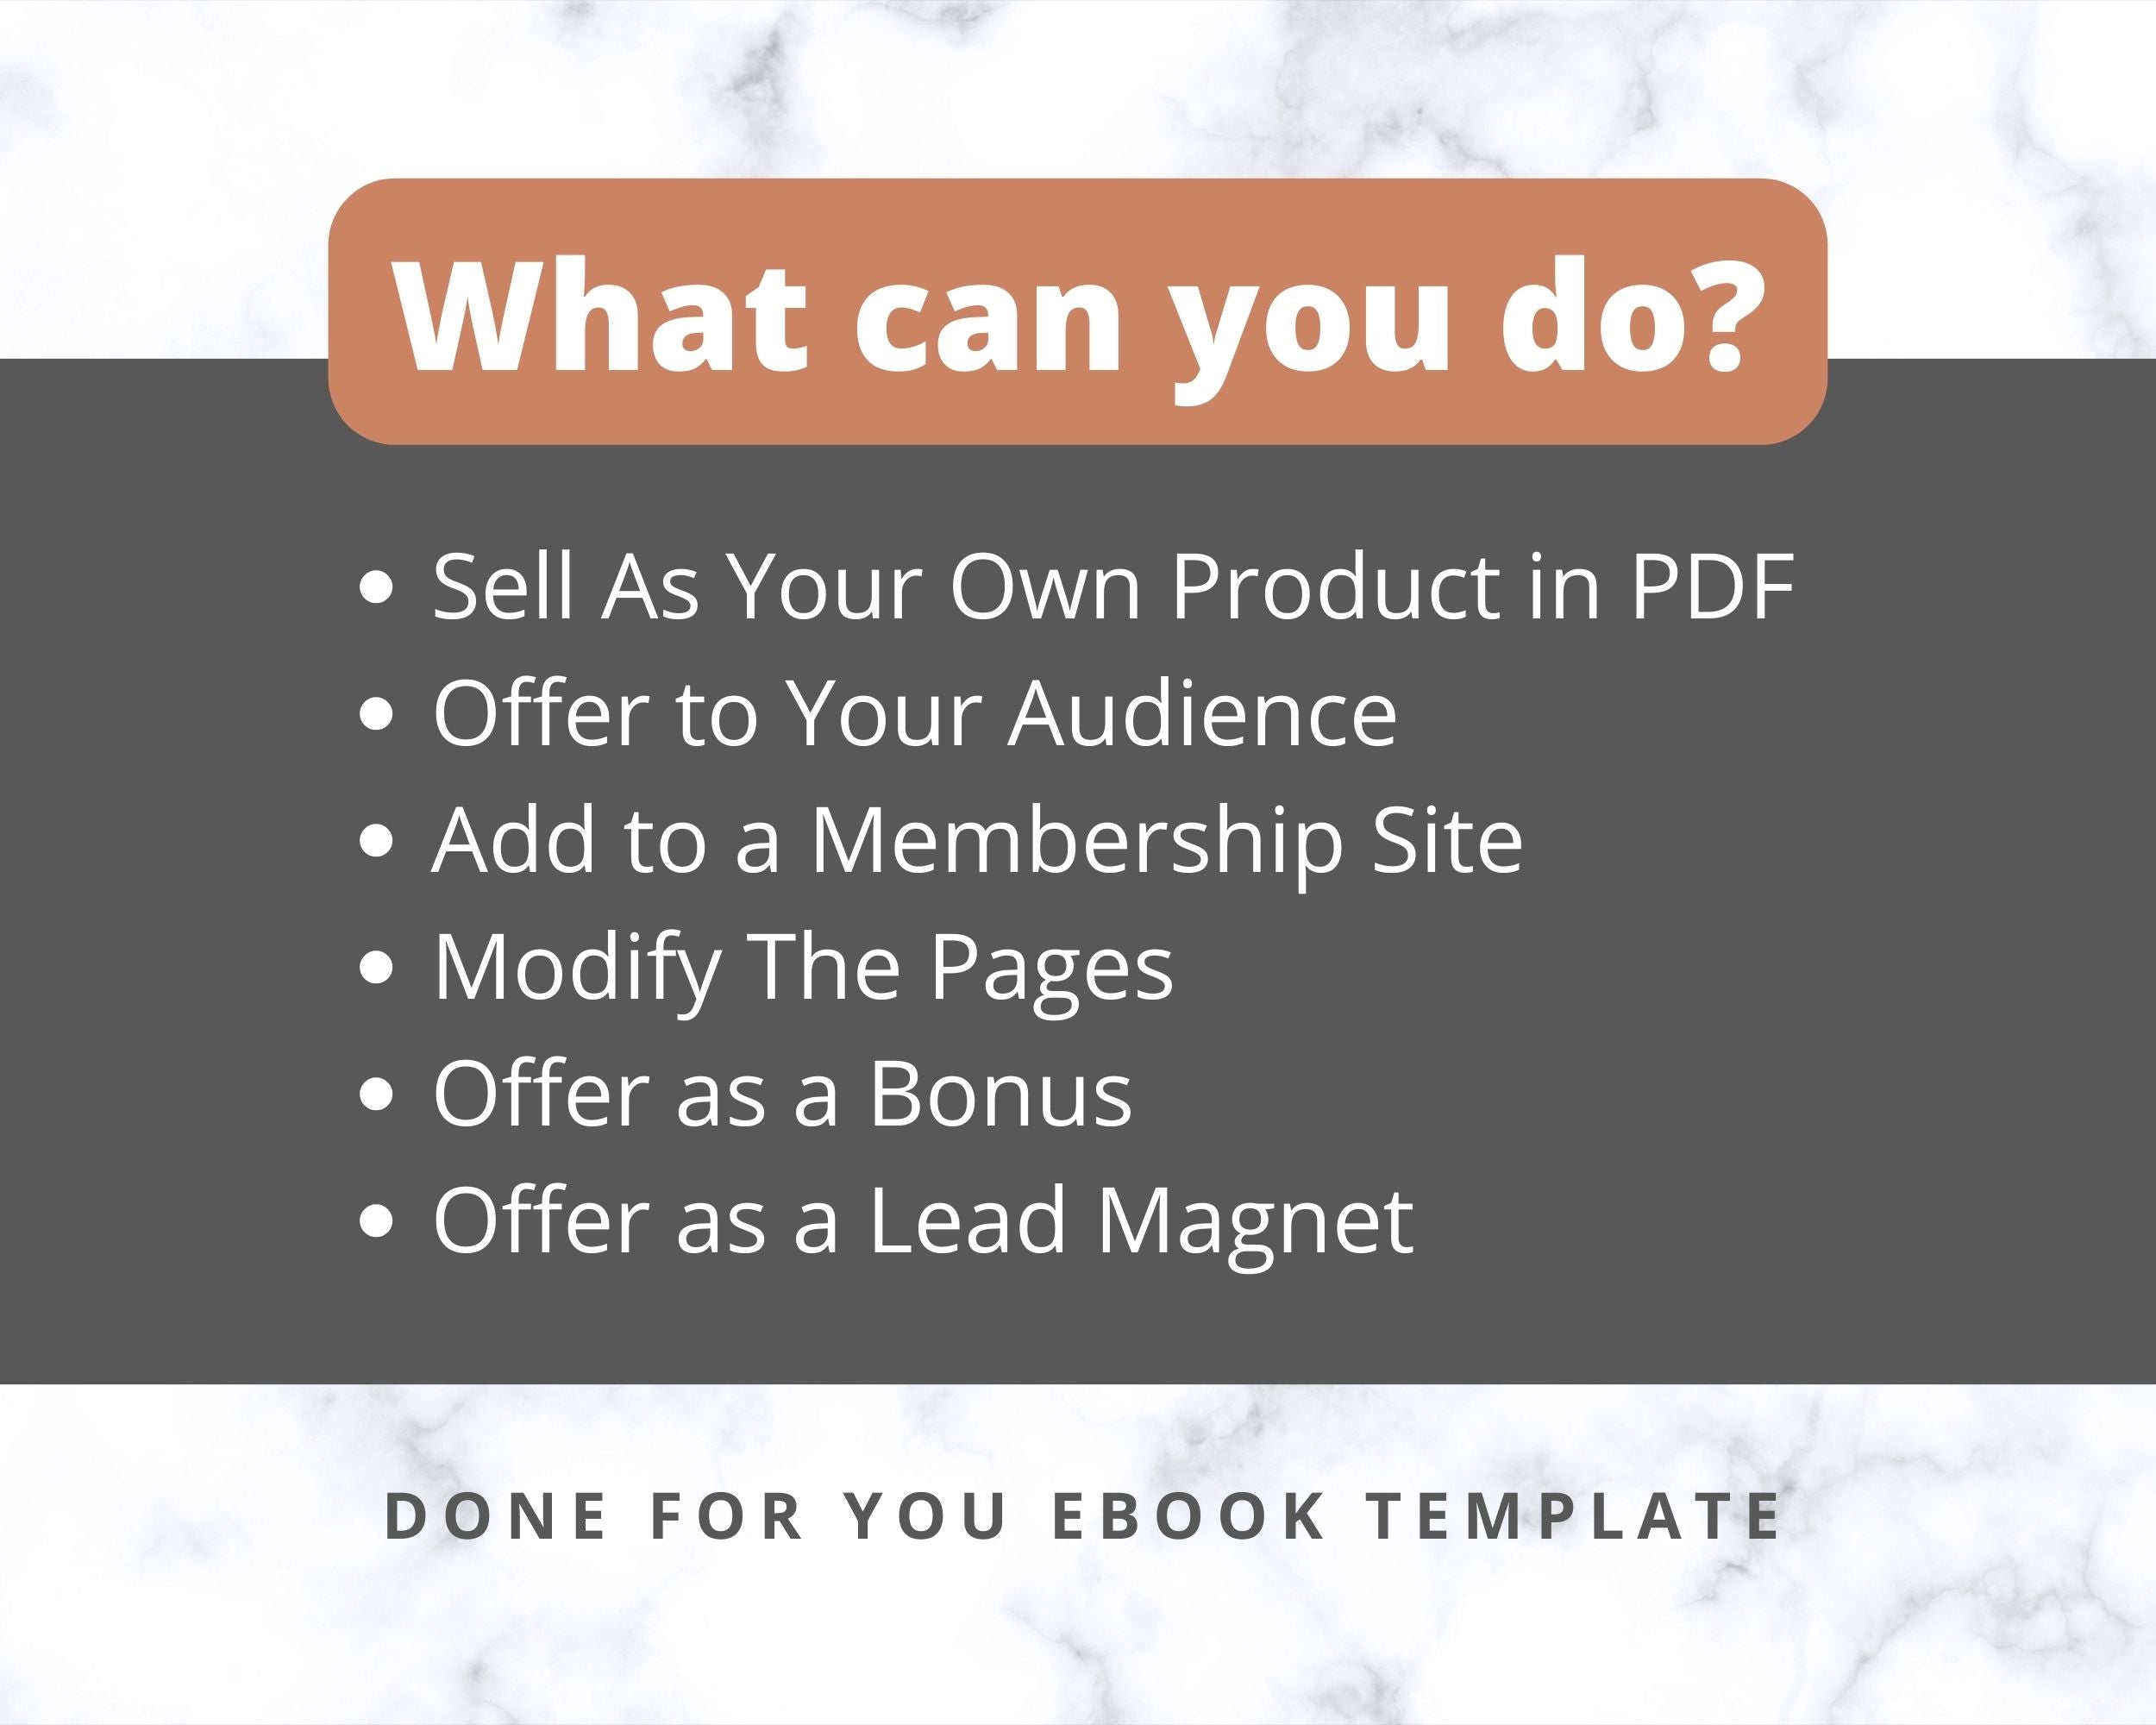 Editable Guide To Aromatherapy Ebook | Done-for-You Ebook in Canva | Rebrandable and Resizable Canva Template